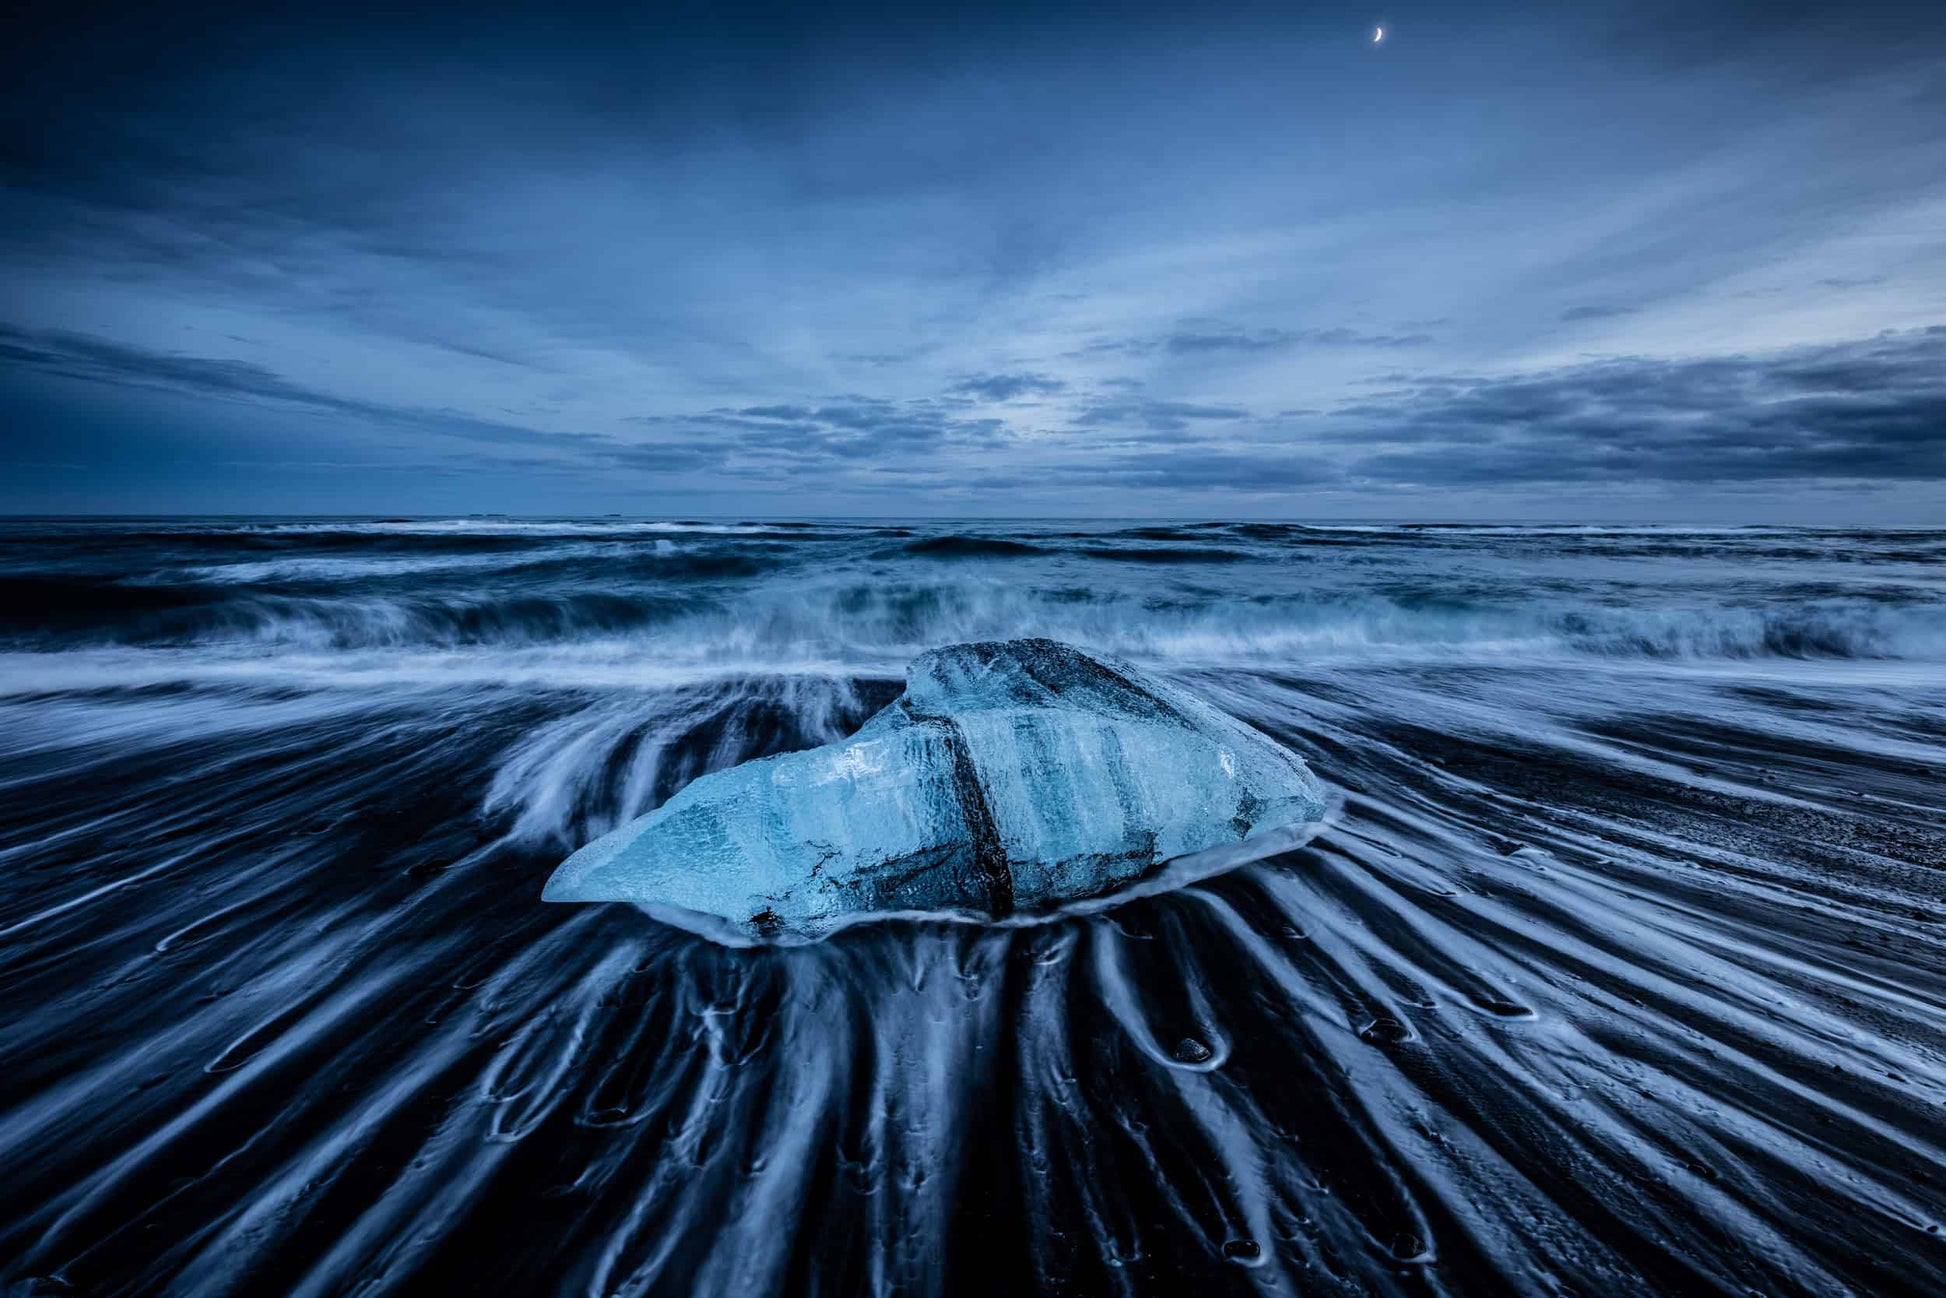 The artpiece 'Satin Blue' by Markus van Hauten which shows an ice rock, sitting in the surf at night, with waves retreating to the ocean around it.